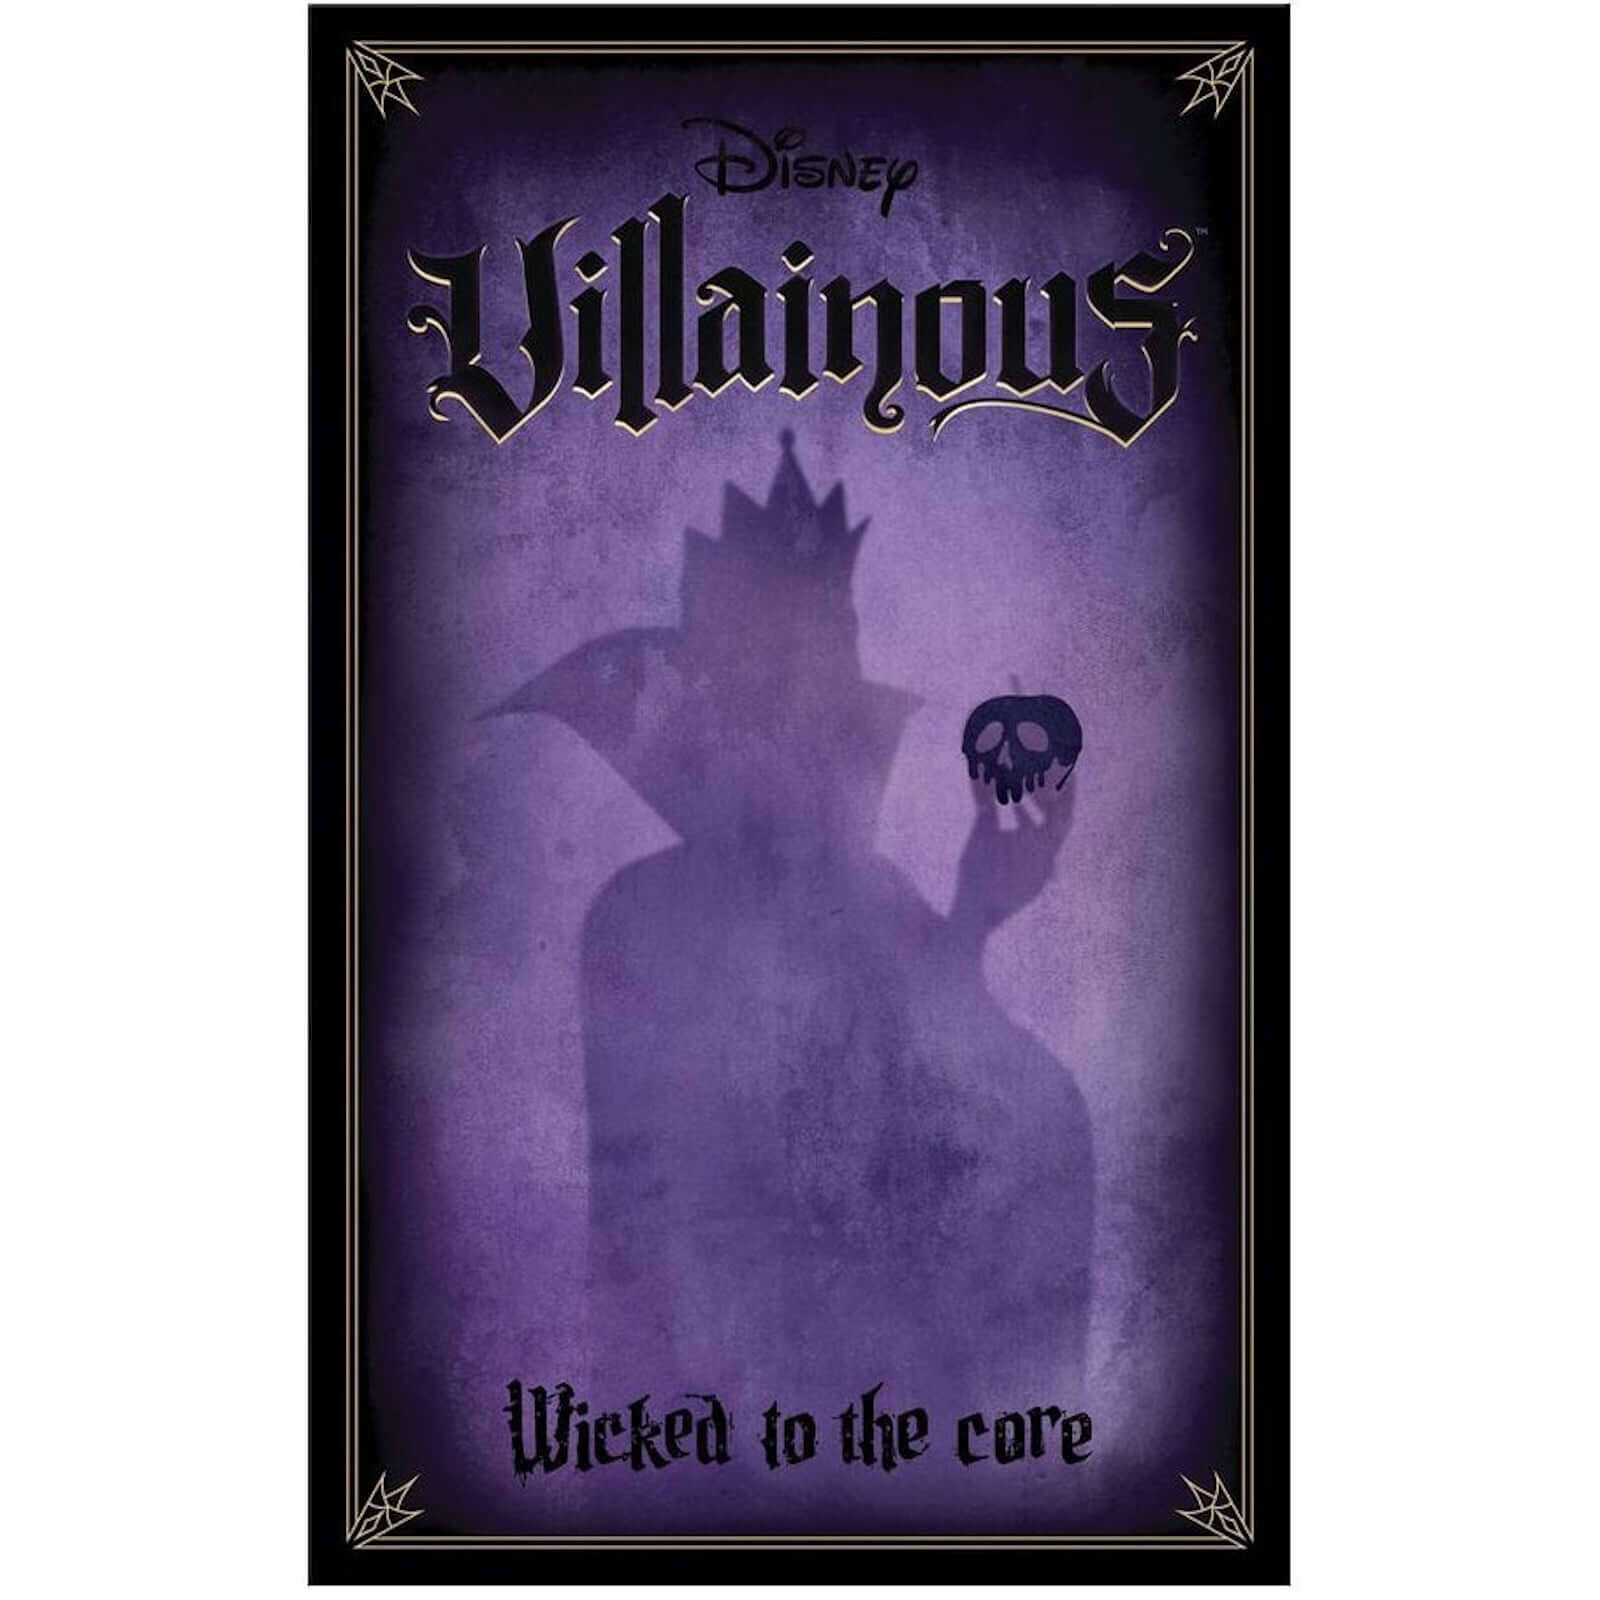 Disney Villainous - Wicked to the Core Board Game Expansion